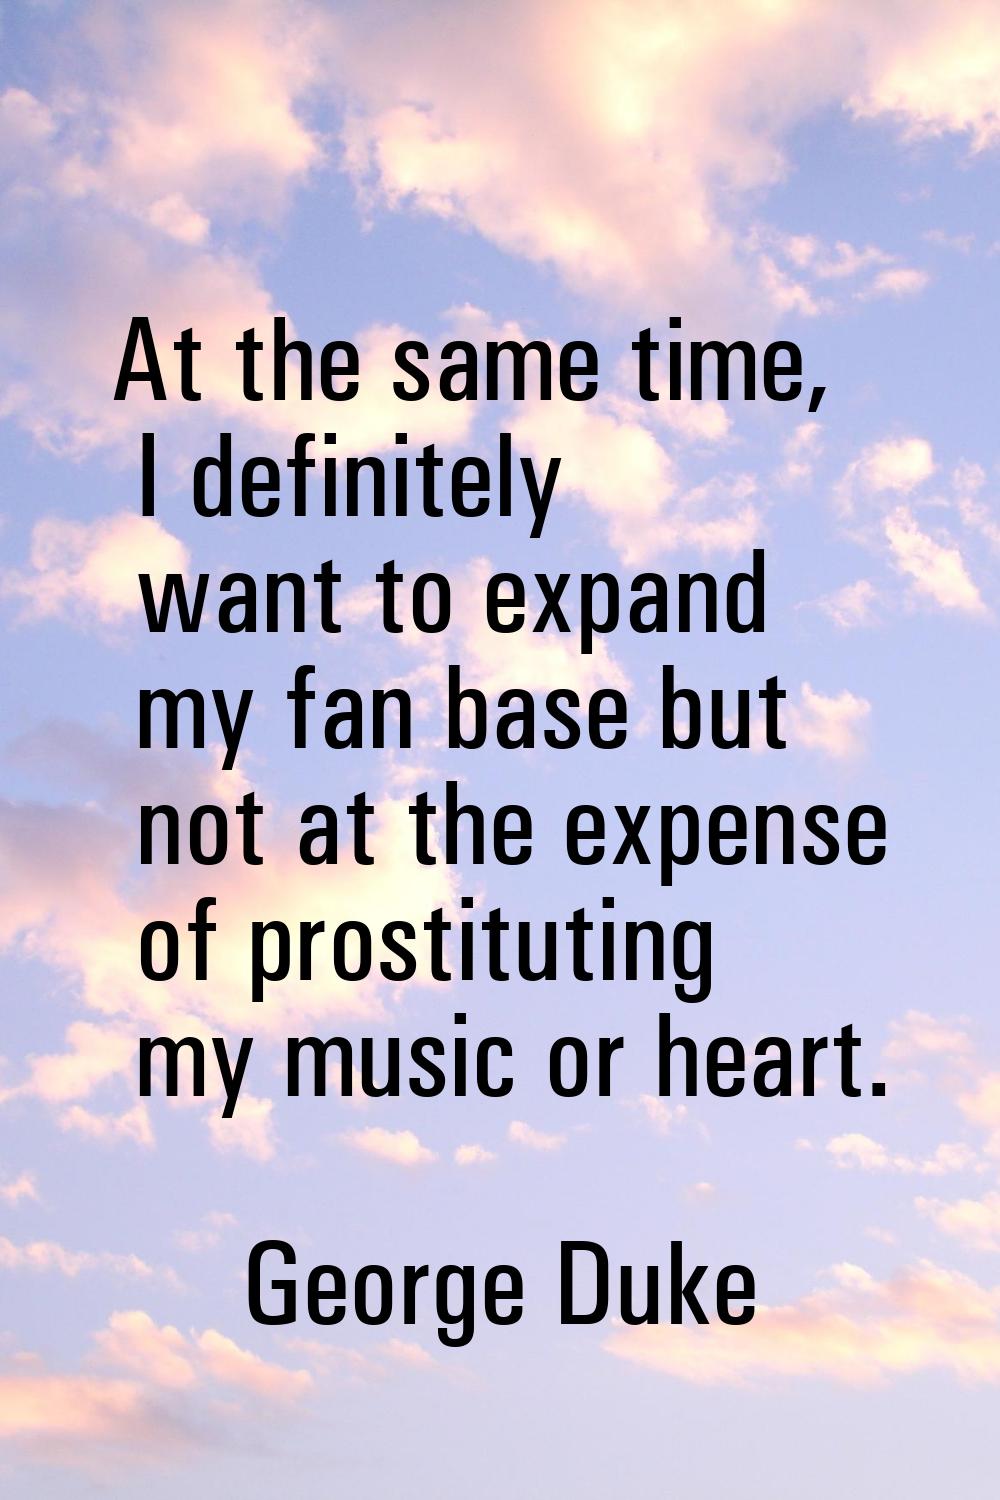 At the same time, I definitely want to expand my fan base but not at the expense of prostituting my